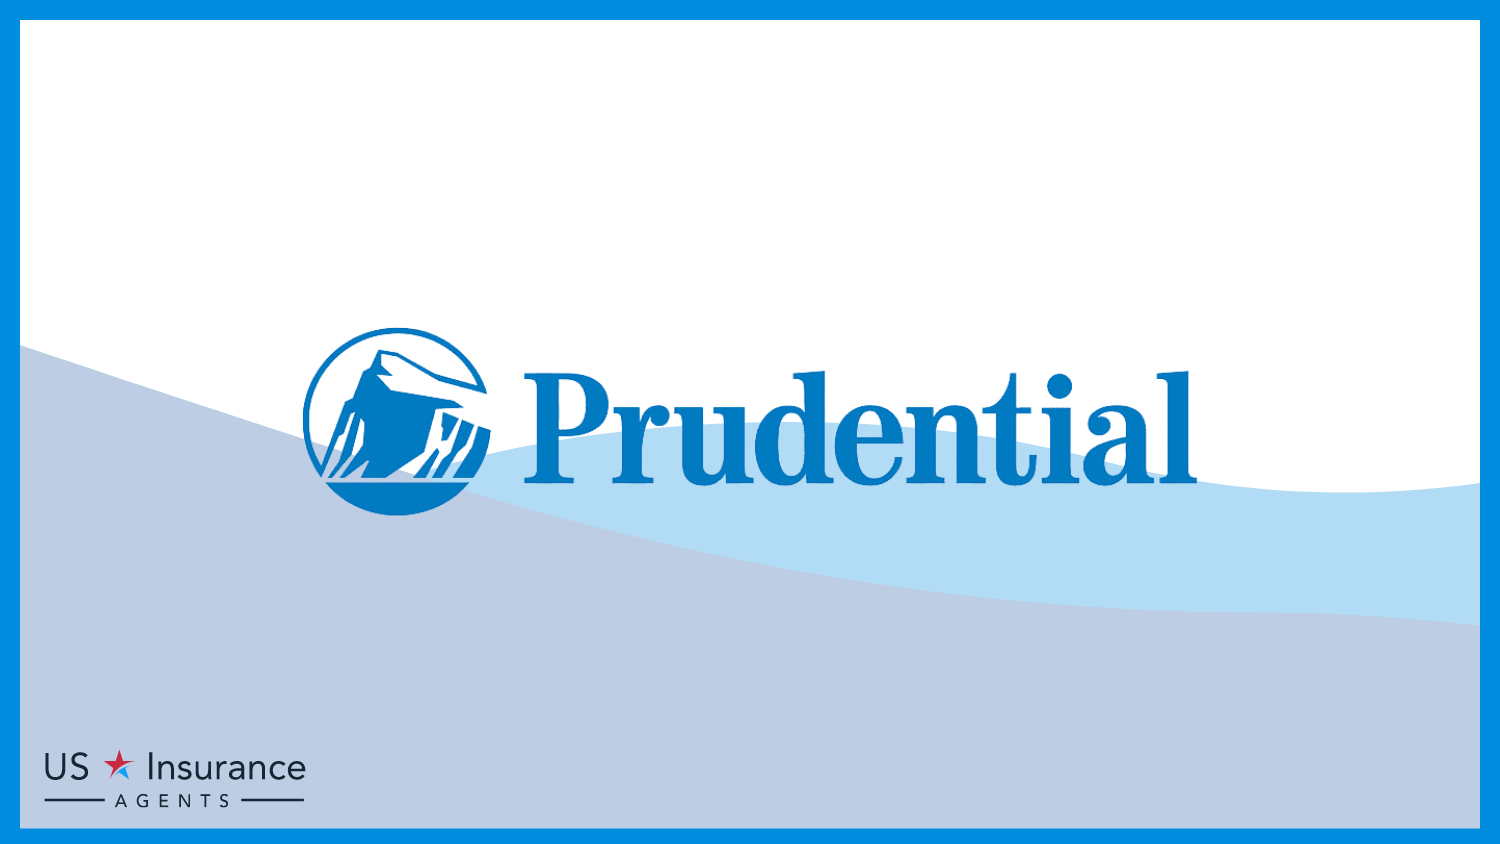 Prudential: Best Life Insurance for Teachers